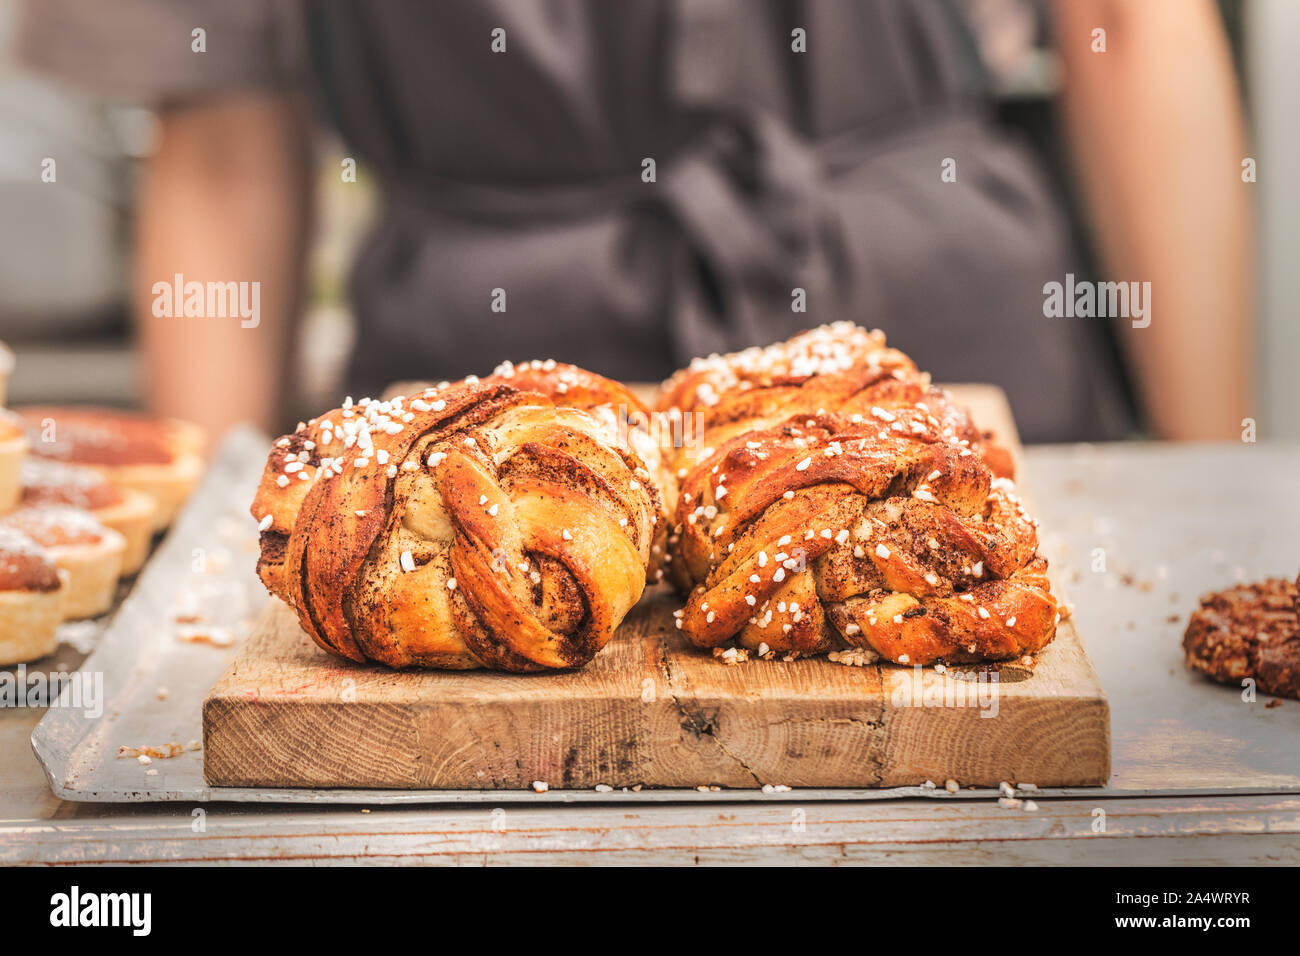 Twisted traditional Swedish cinnamon buns at a café. The sweet buns are on a wooden chopping board, and there is an  unrecognizable person with an apr Stock Photo